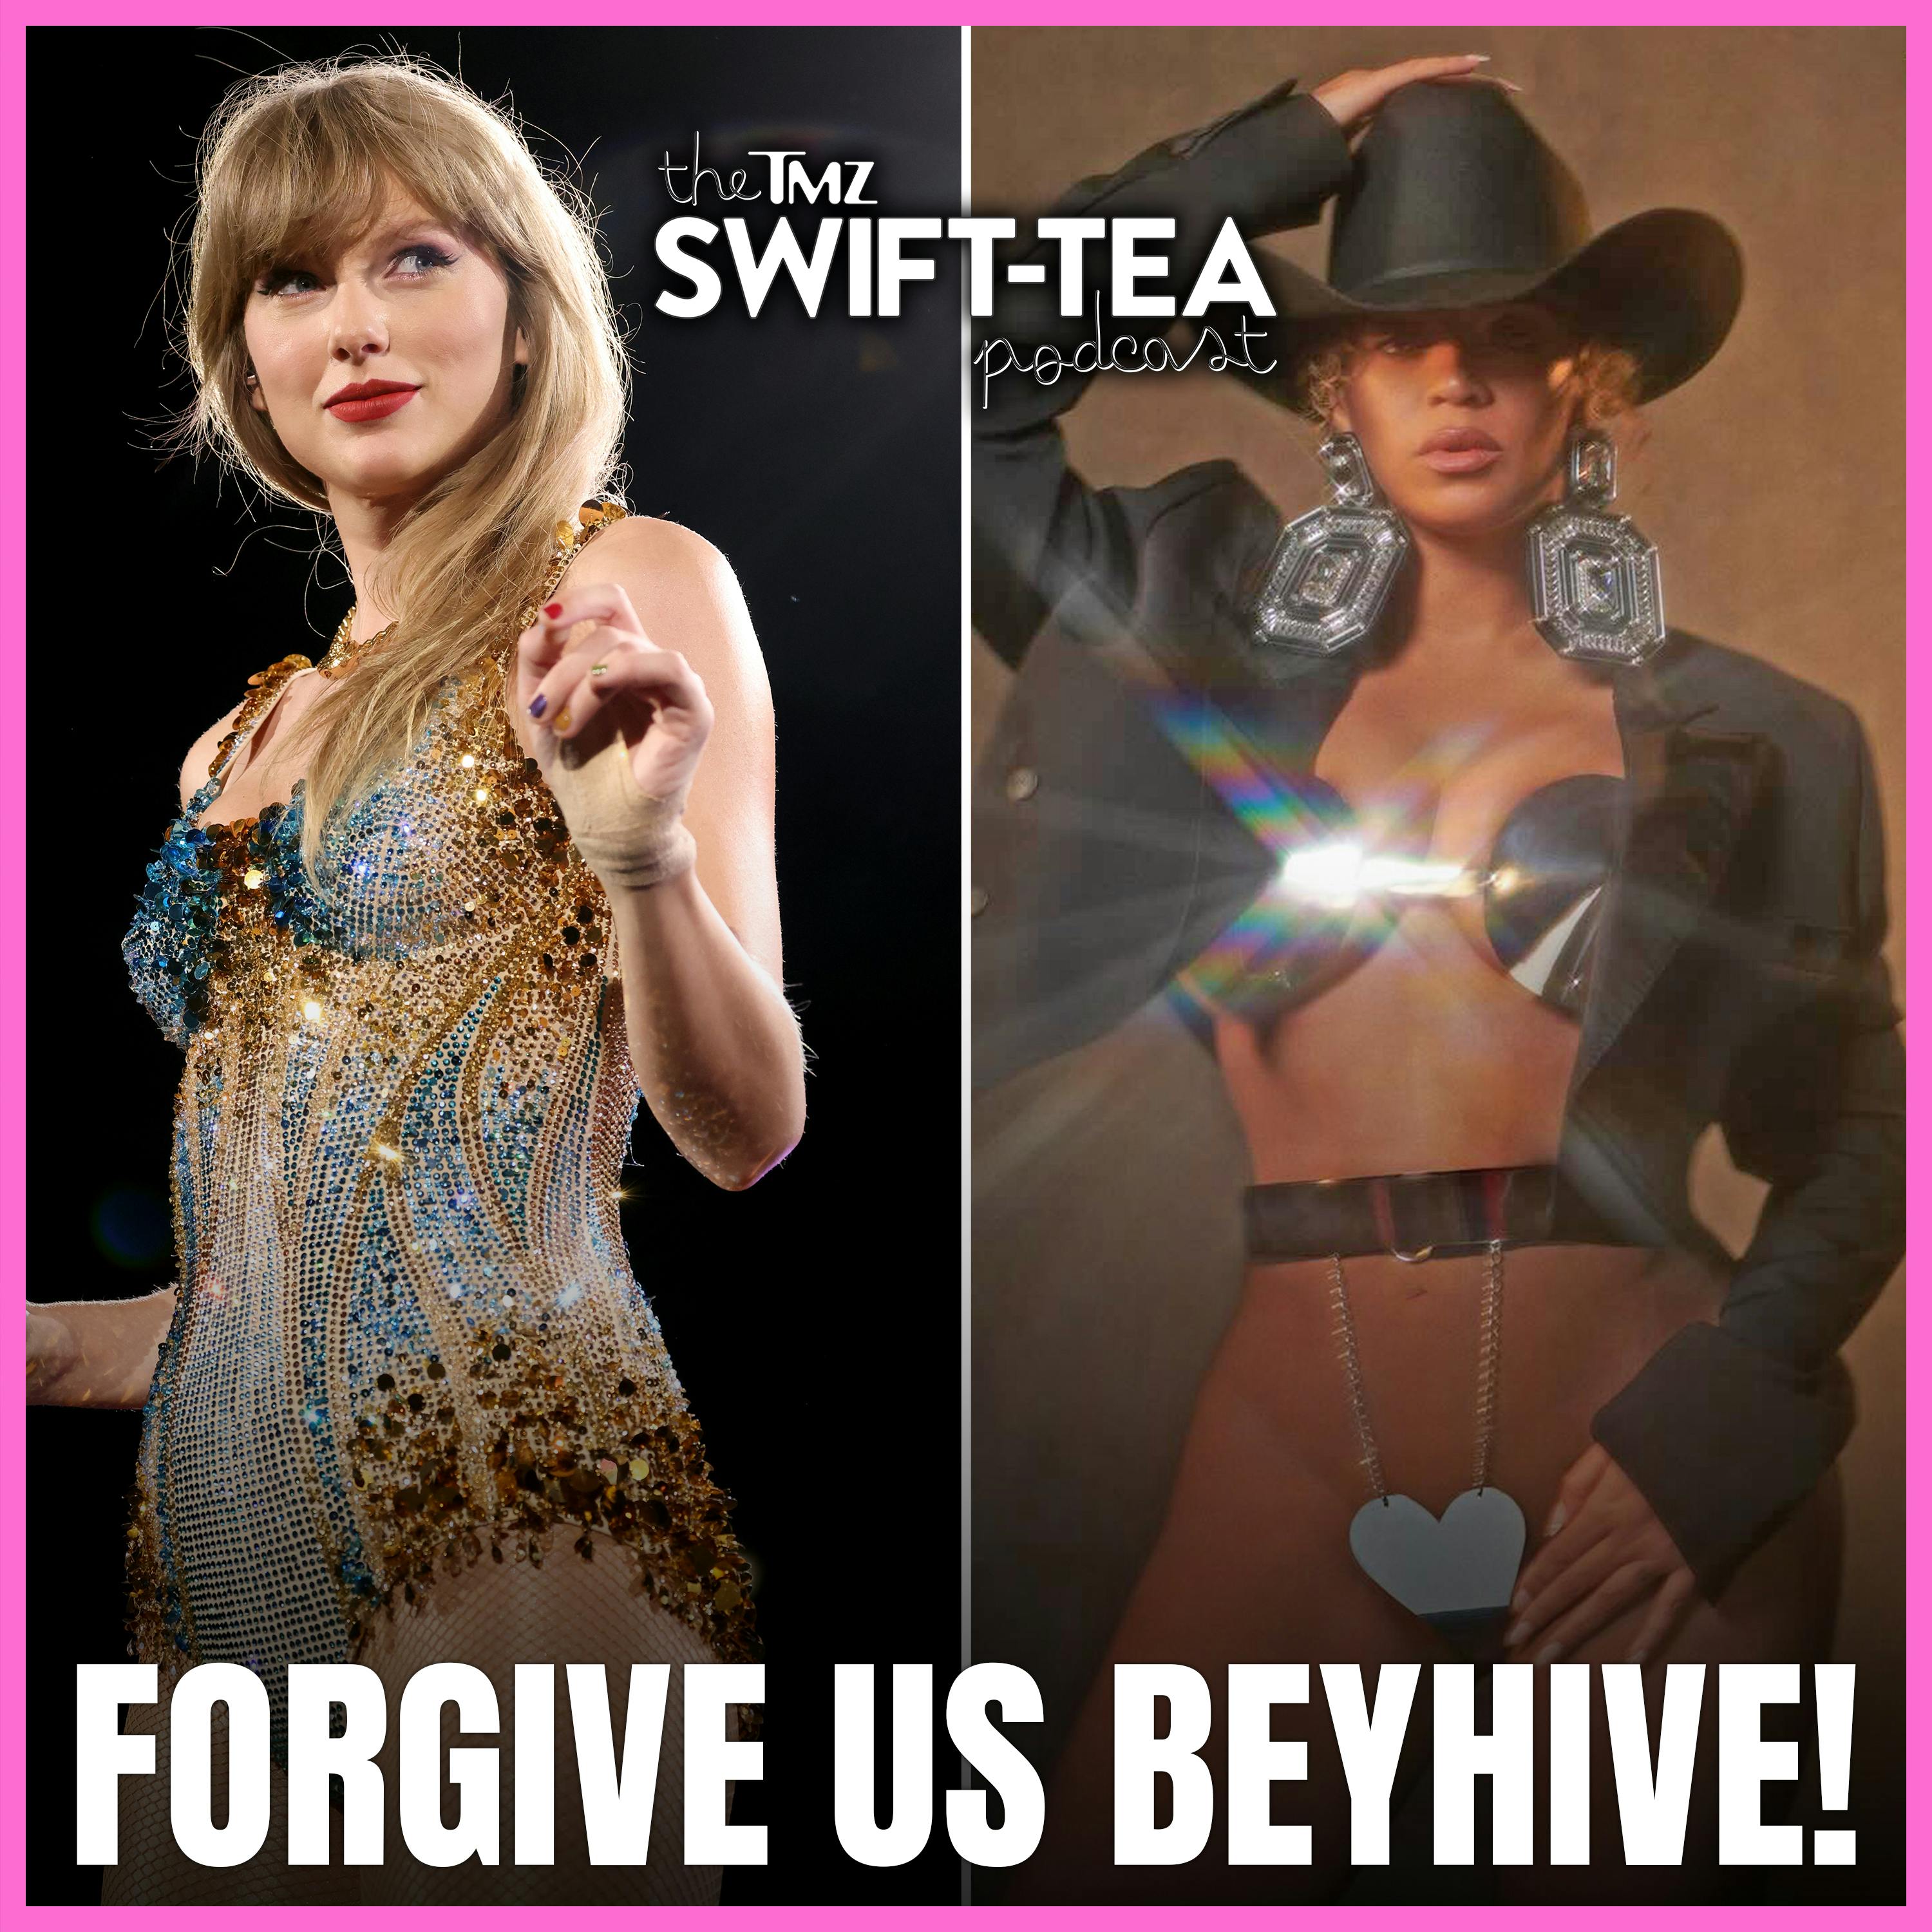 TMZ Swift-Tea Podcast: The Old Taylor is Back, Super Bowl Parade and We Hear You Beyhive!